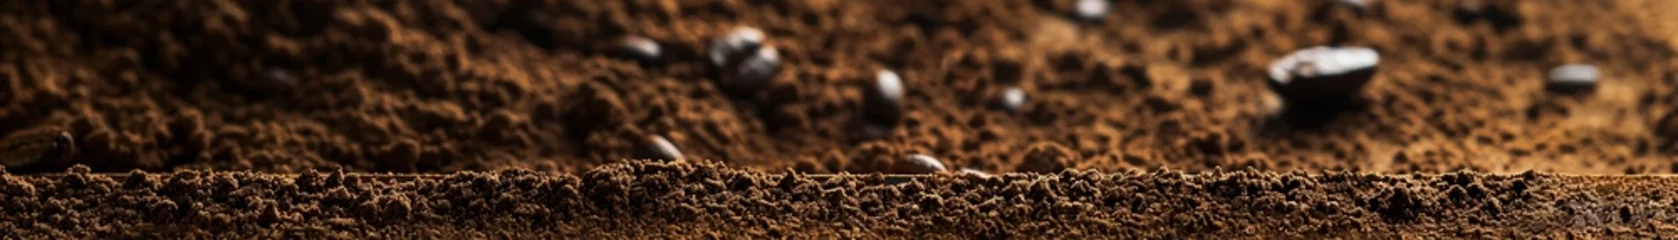 Poster Freshly ground coffee beans close up details of texture and aroma © Wonderful Studio